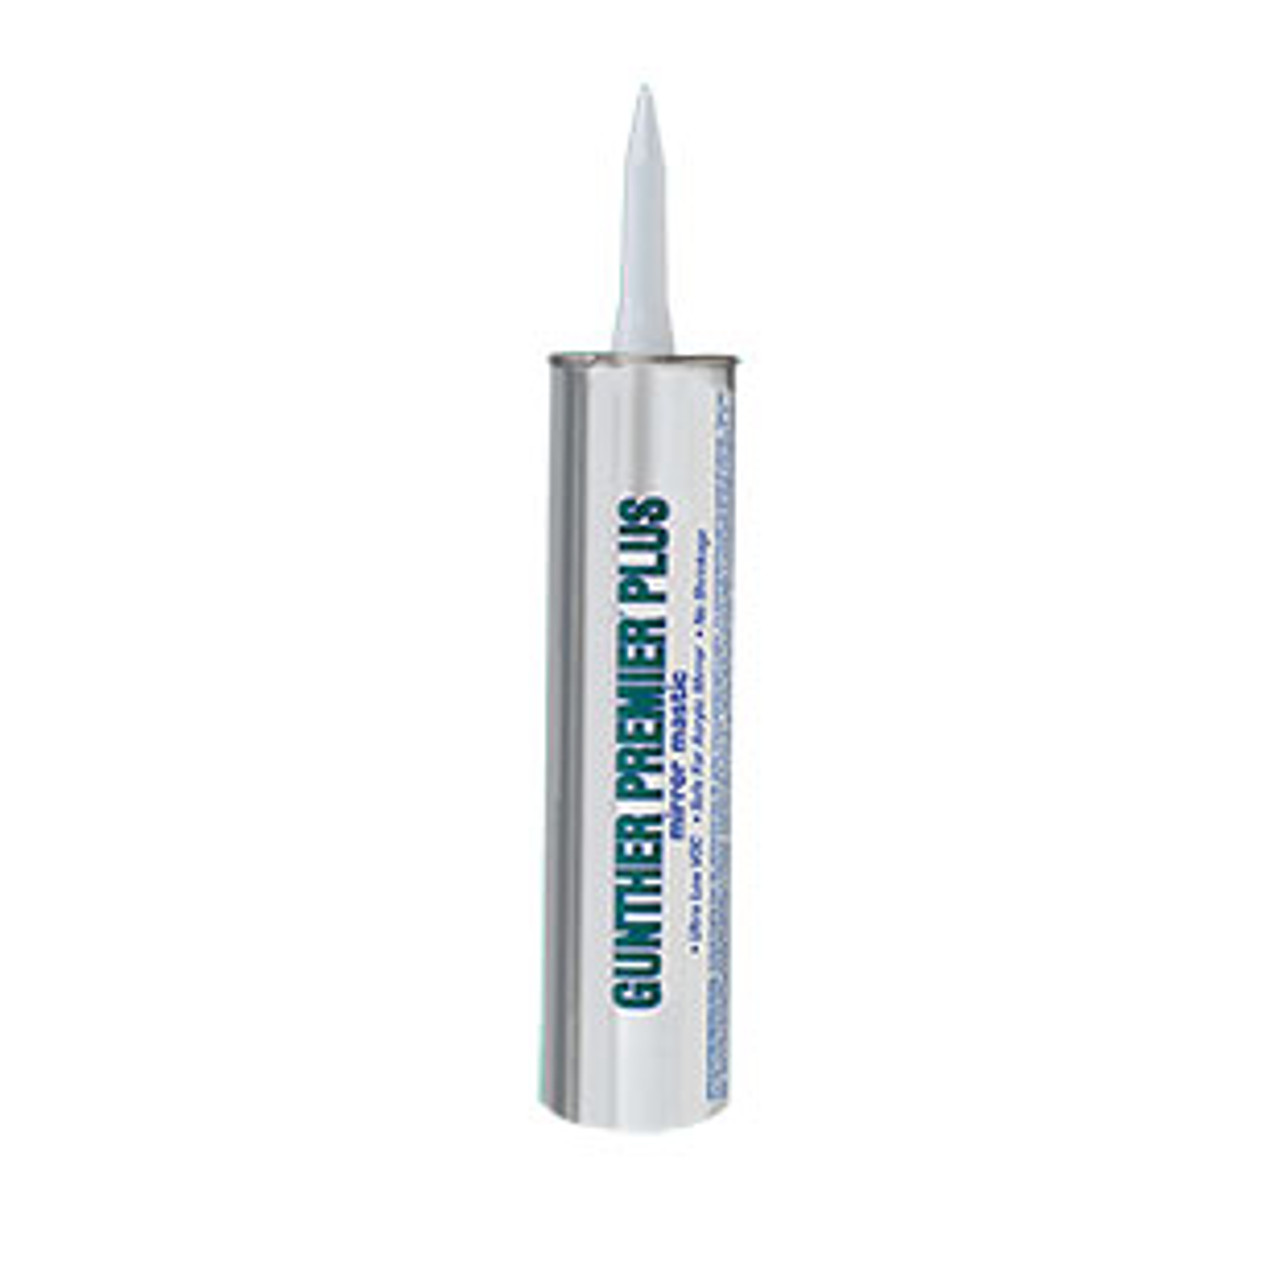 Mirror Adhesive – The Strongest Mirror Adhesive Available. - CT1